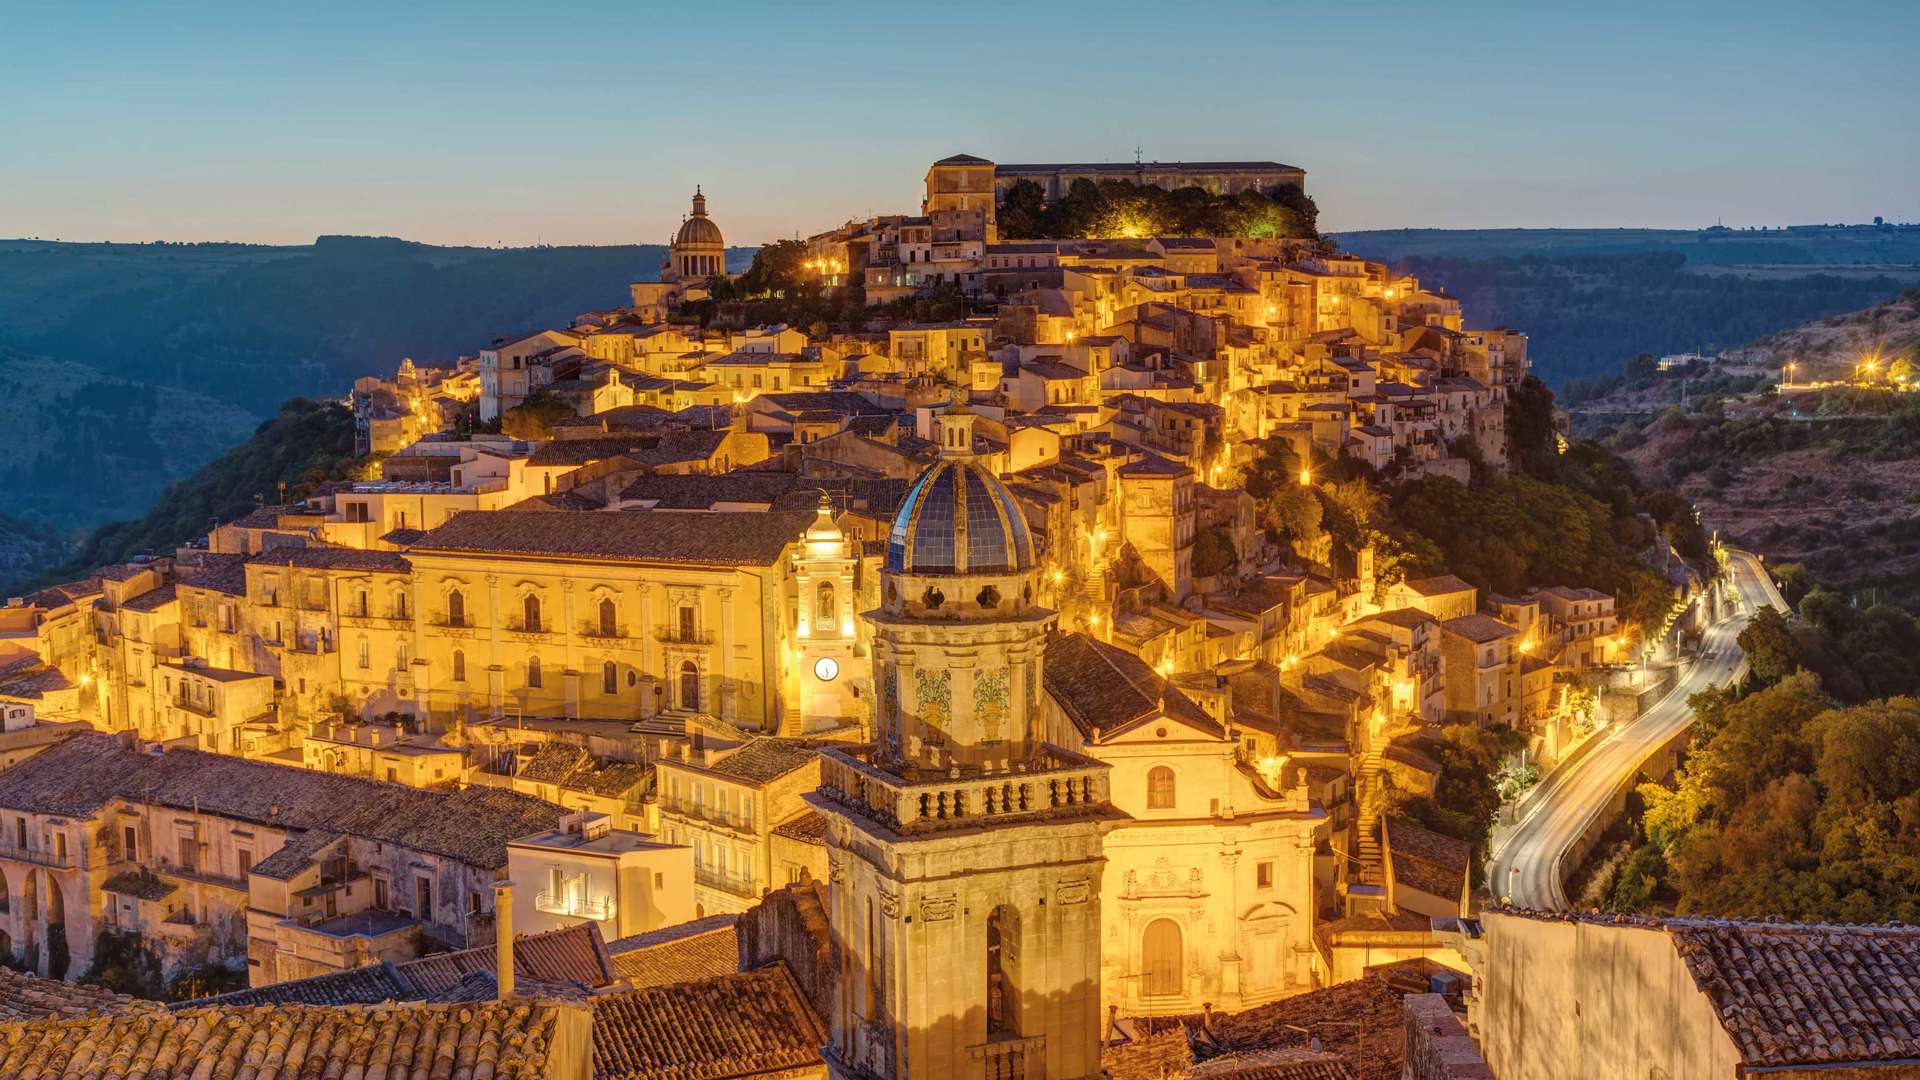 The Old Town Of Ragusa Ibla, Sicily, Italy